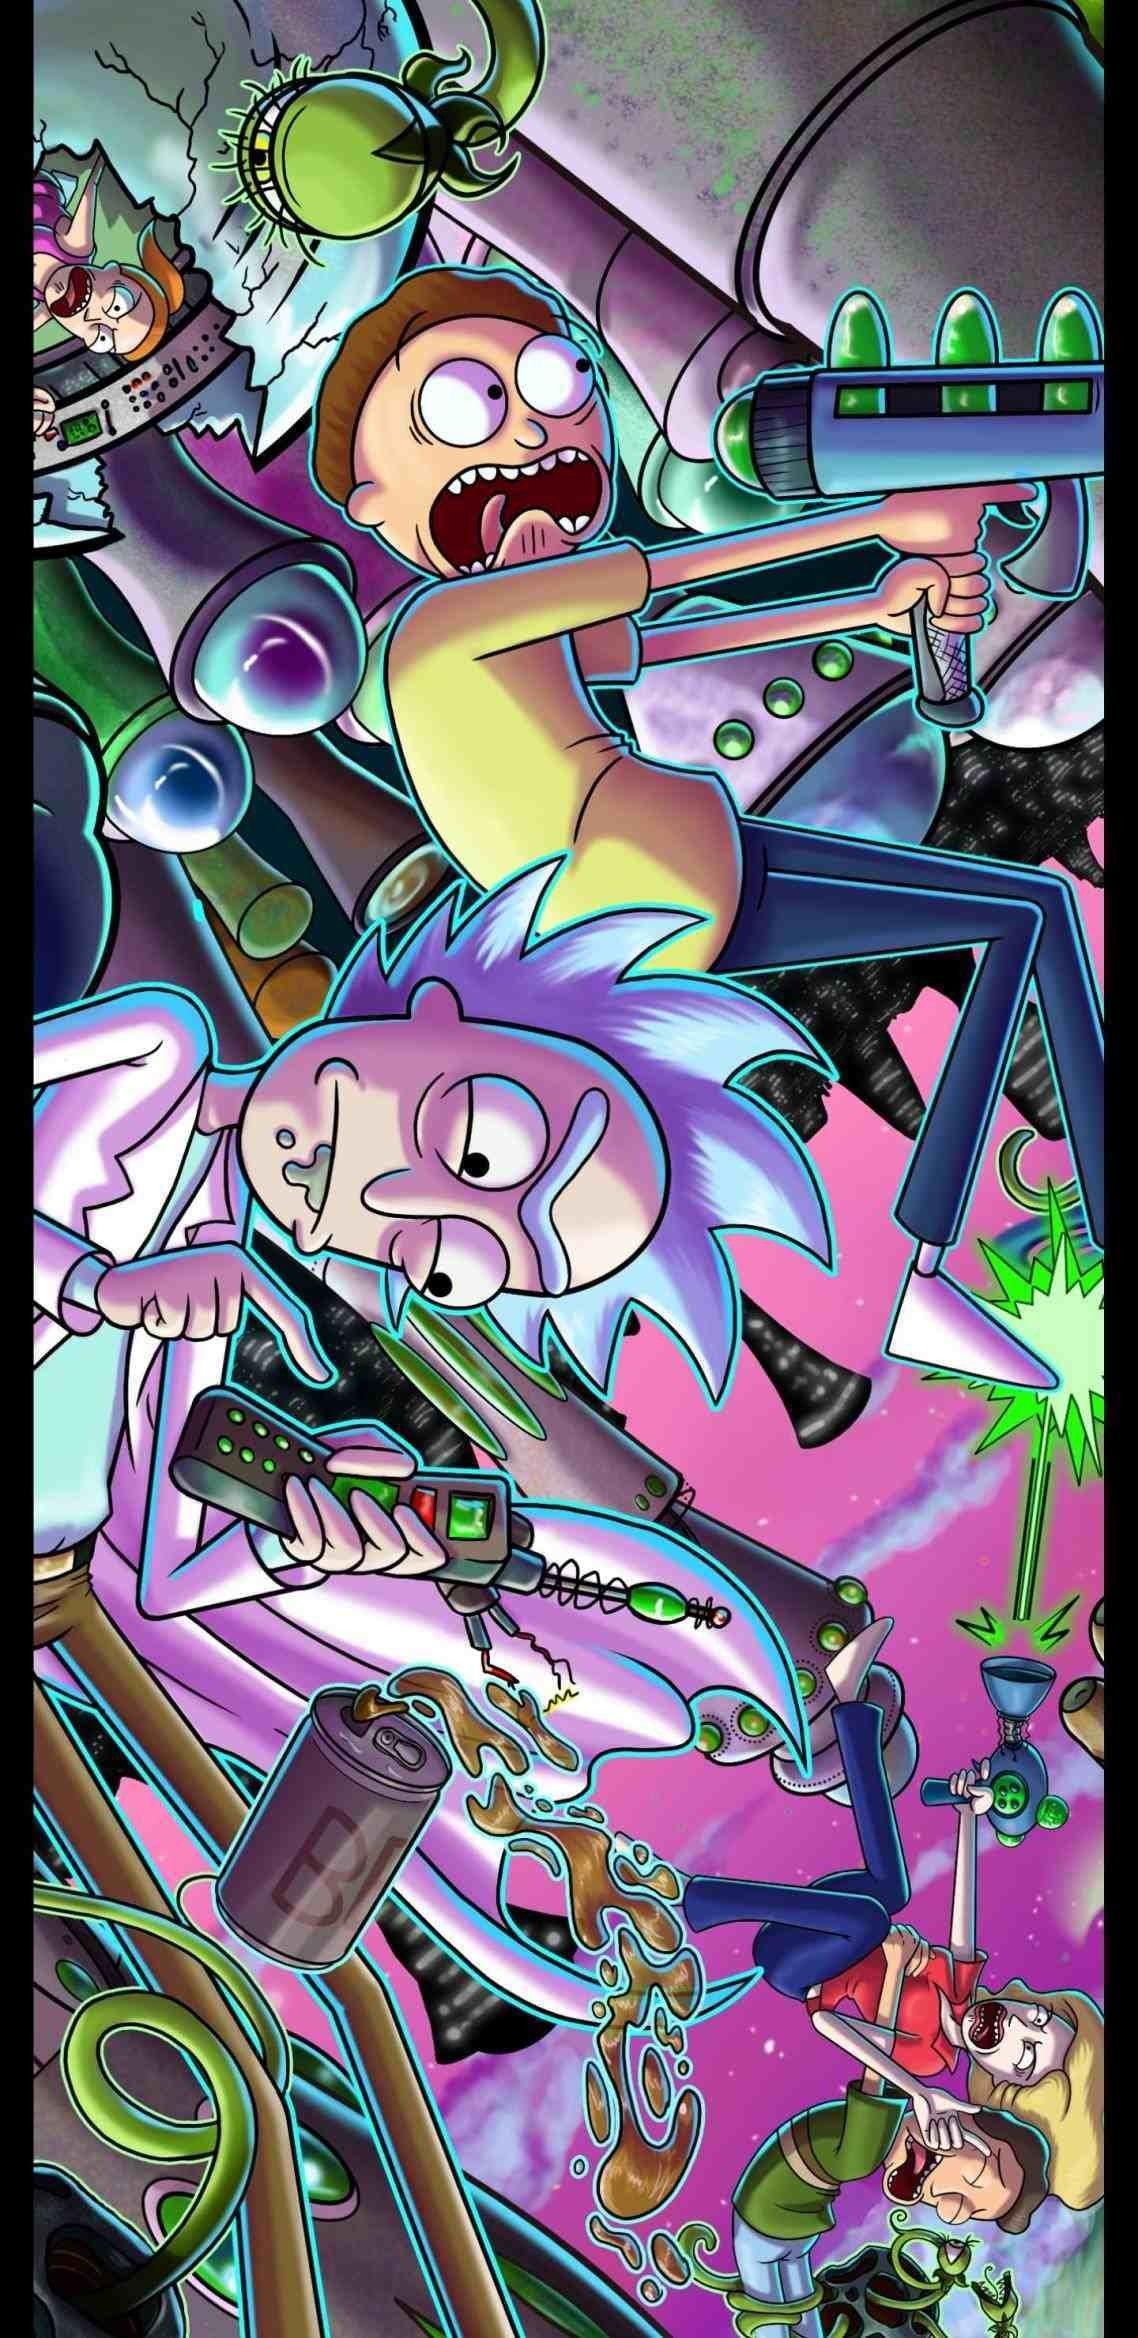 Rick and Morty Trippy Phone Wallpaper Free Rick and Morty